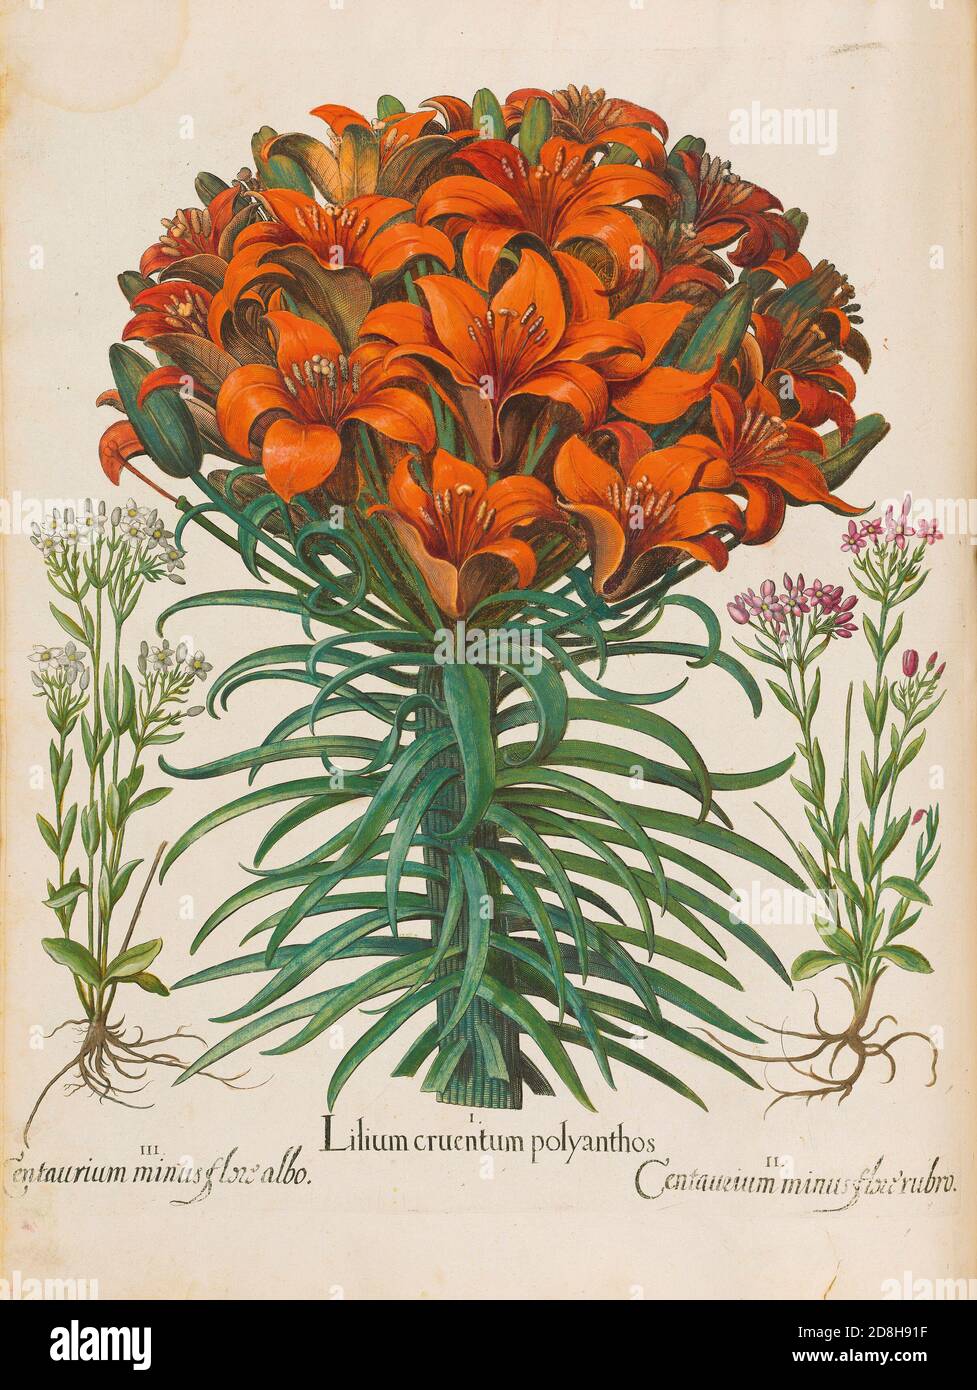 Lilies. Lilium Cruentum Polyanthos, botanical illustration by Basil Besler from the The Hortus Eystettensis, a codex produced by Basilius Besler 1613. Stock Photo